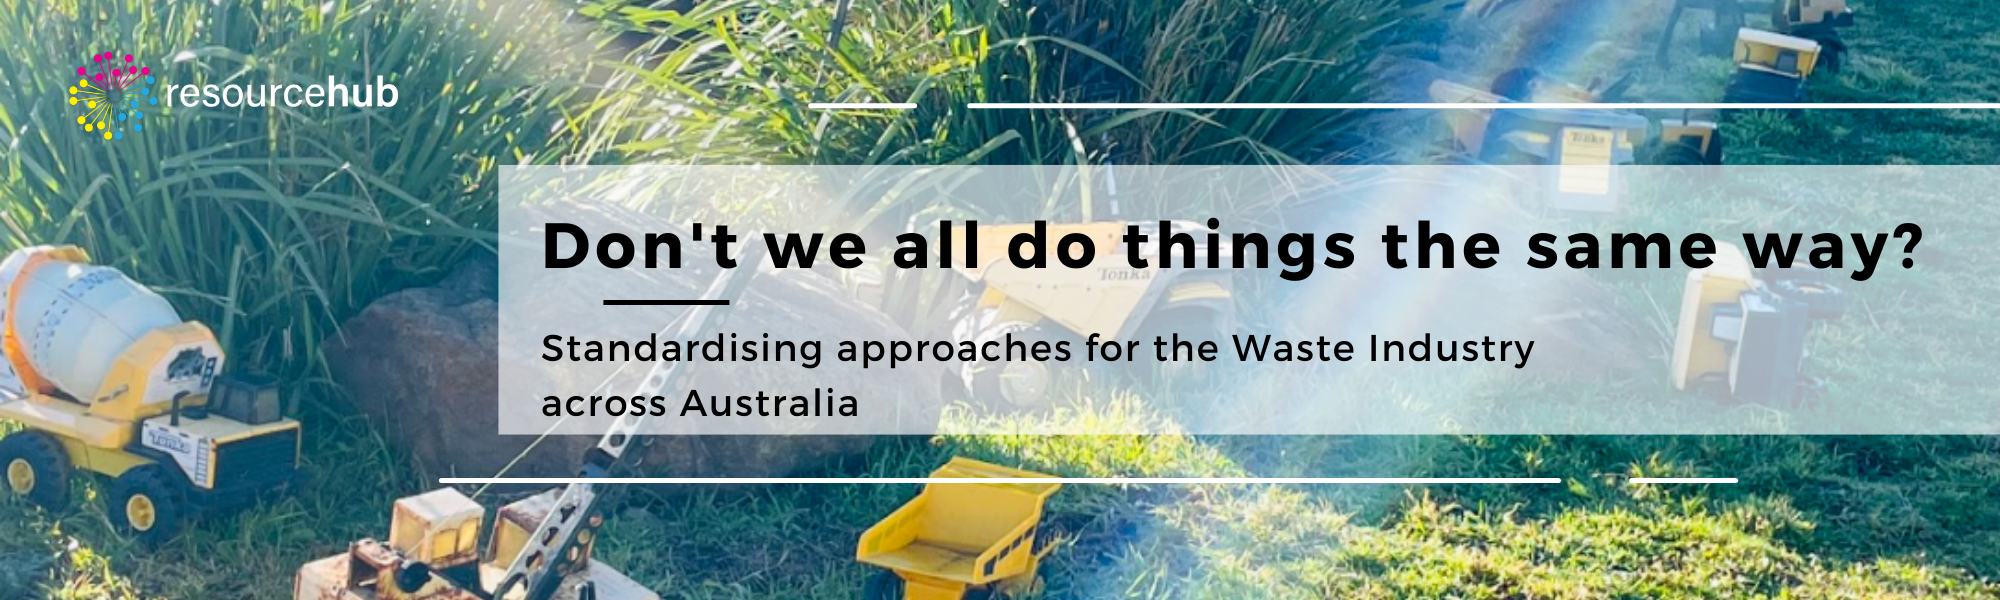 Don't we all do things the same way, thoughts on standardising approaches across the waste industry in Australia